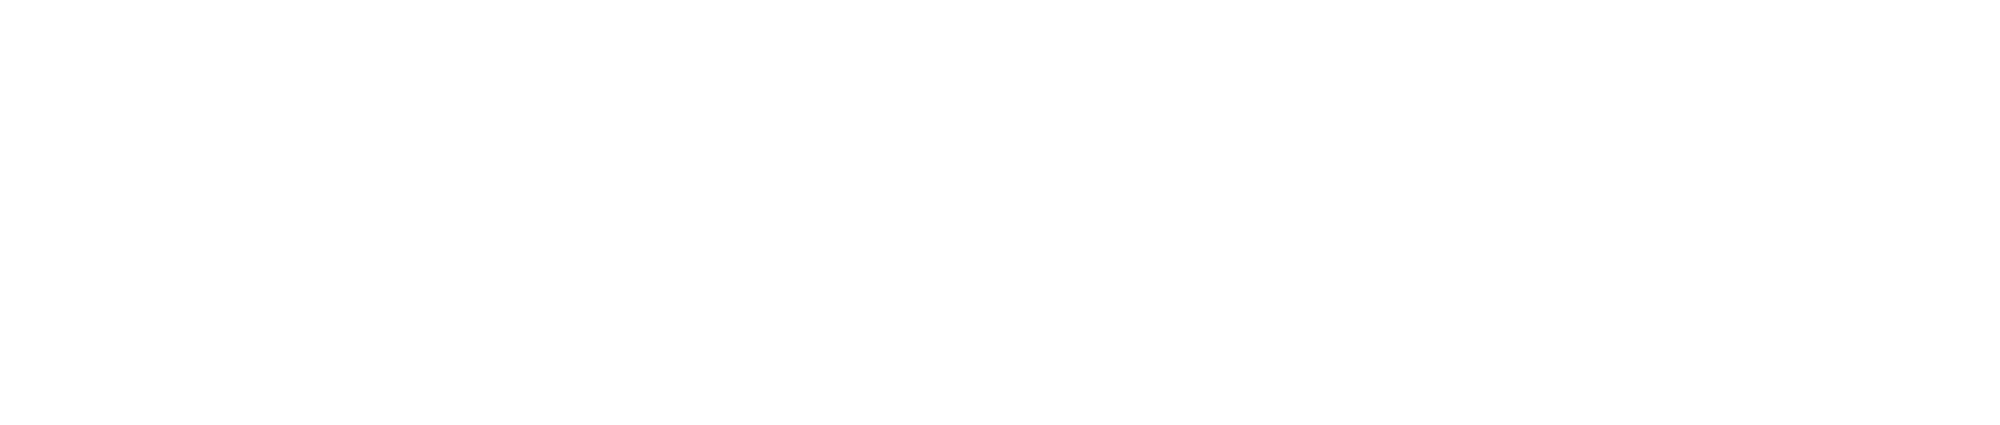 Number of restaurants large type